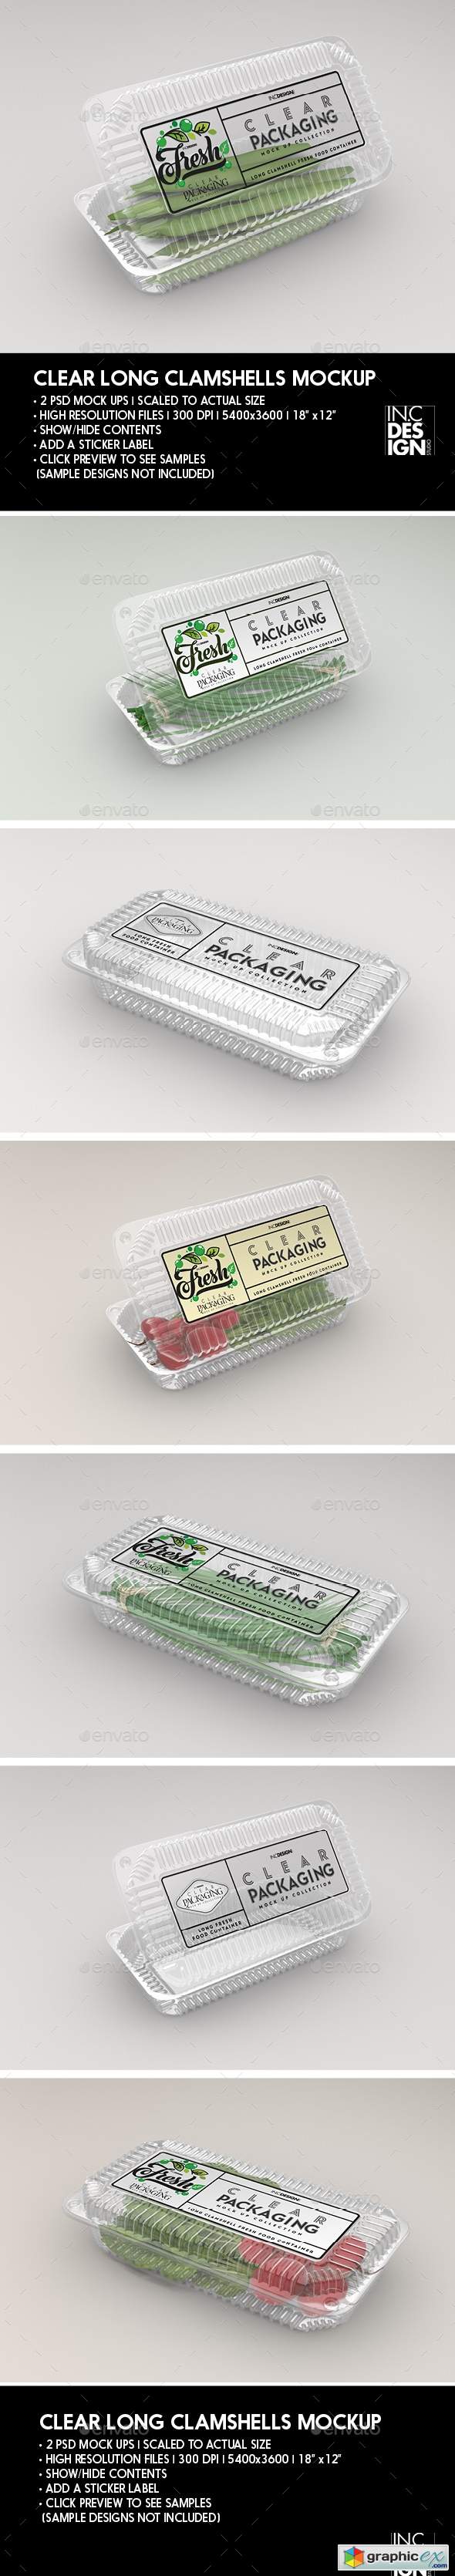 Clear Long Clamshell Packaging Mockup